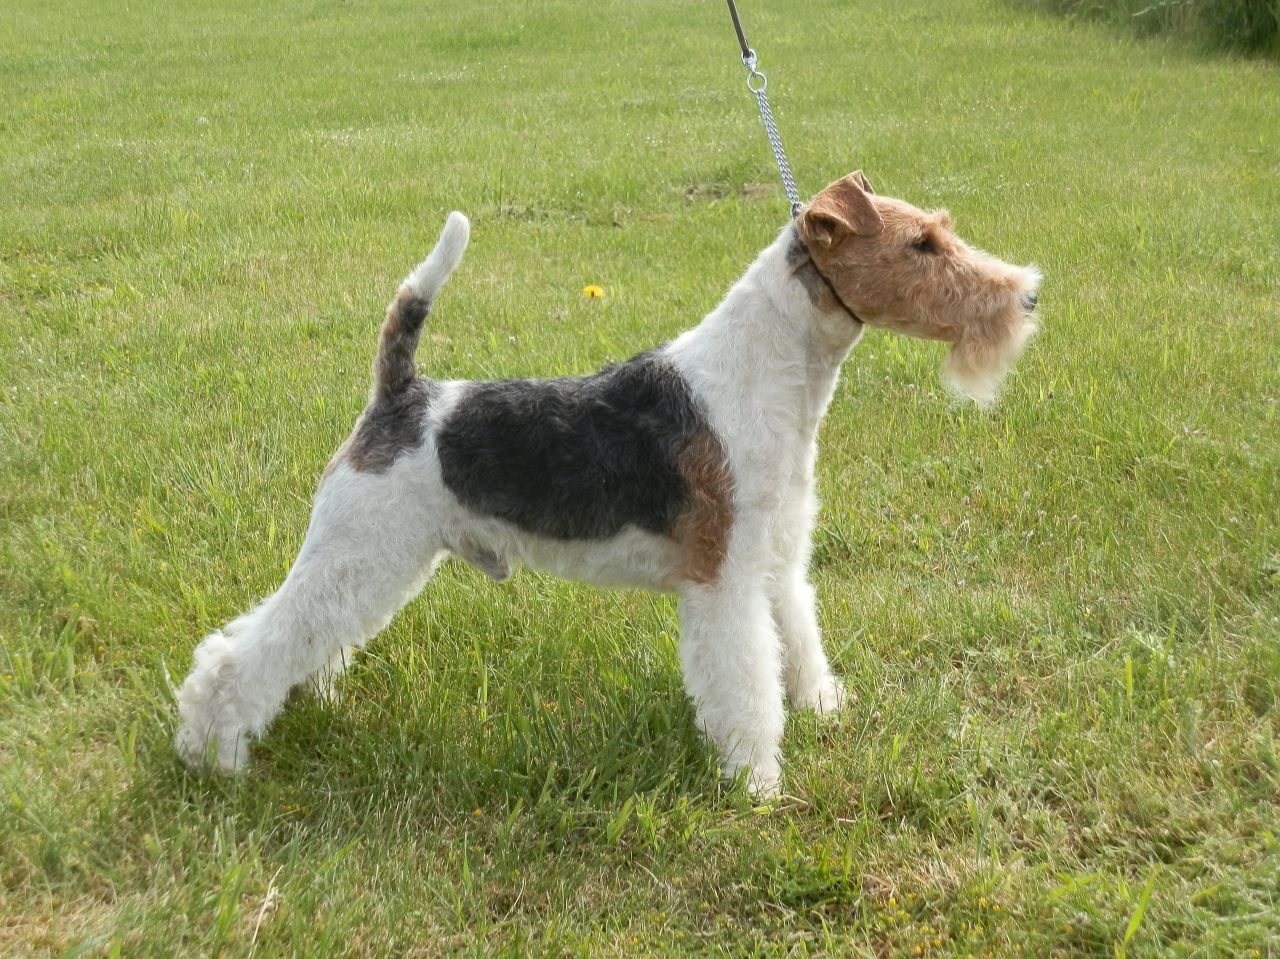 Fox Terrier, Wire Dog: Fox Proven Wire Fox Terrier Dog For Stud Kc Registered Grantham Breed